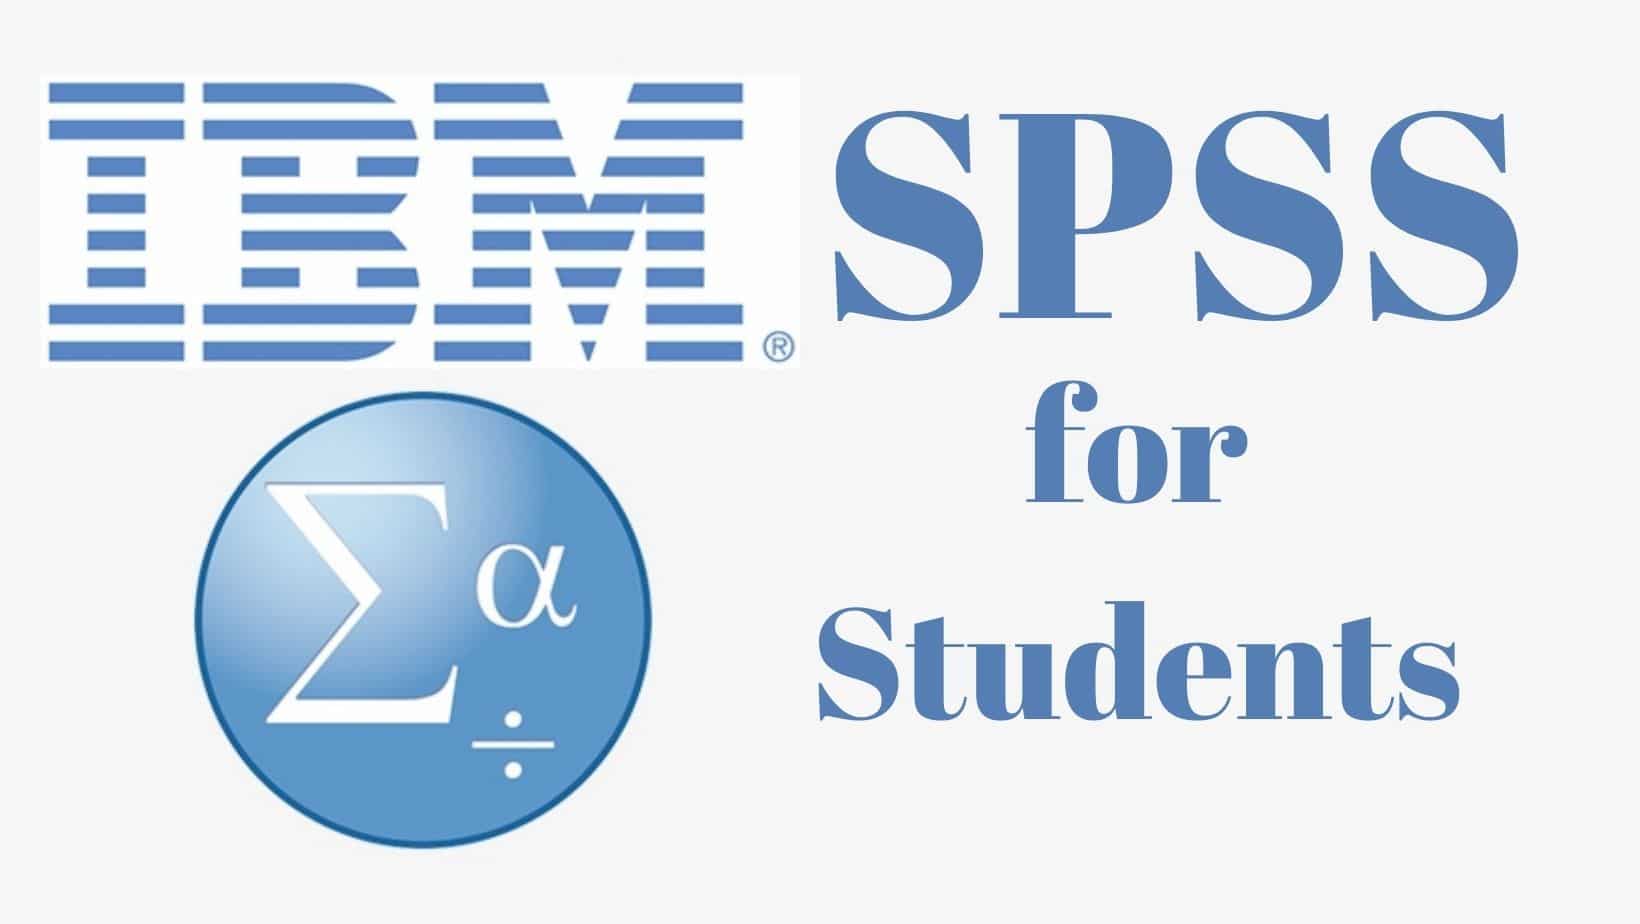 SPSS for Students Software Free Download